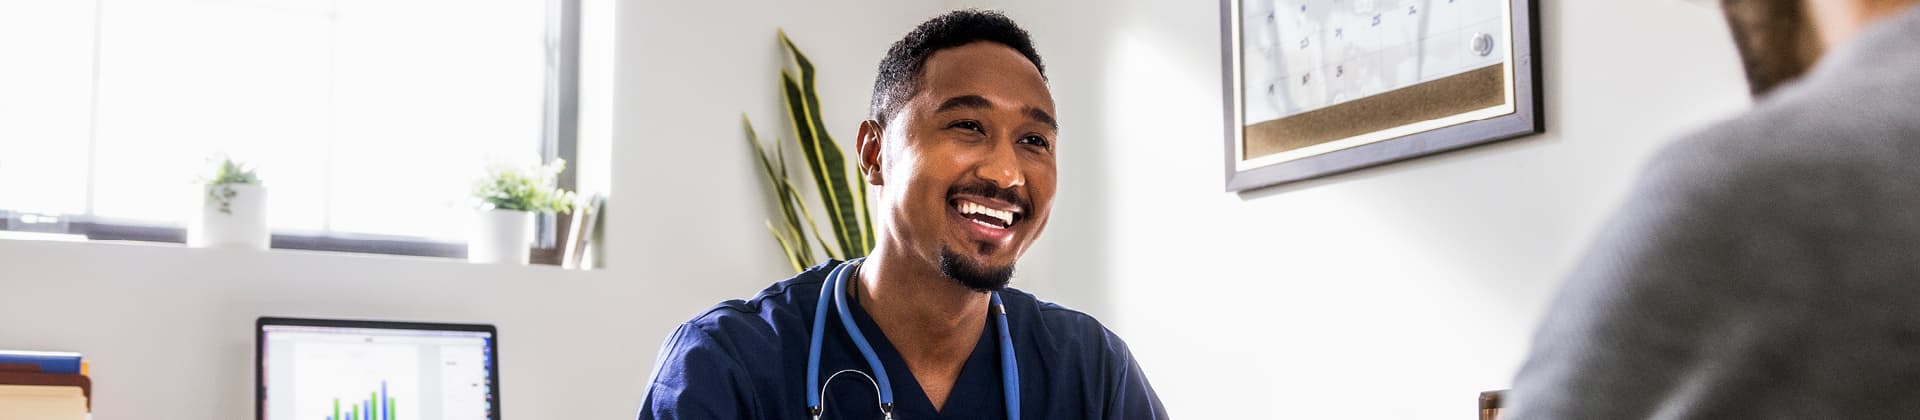 medical professional man smiling at patient sitting across from him at desk